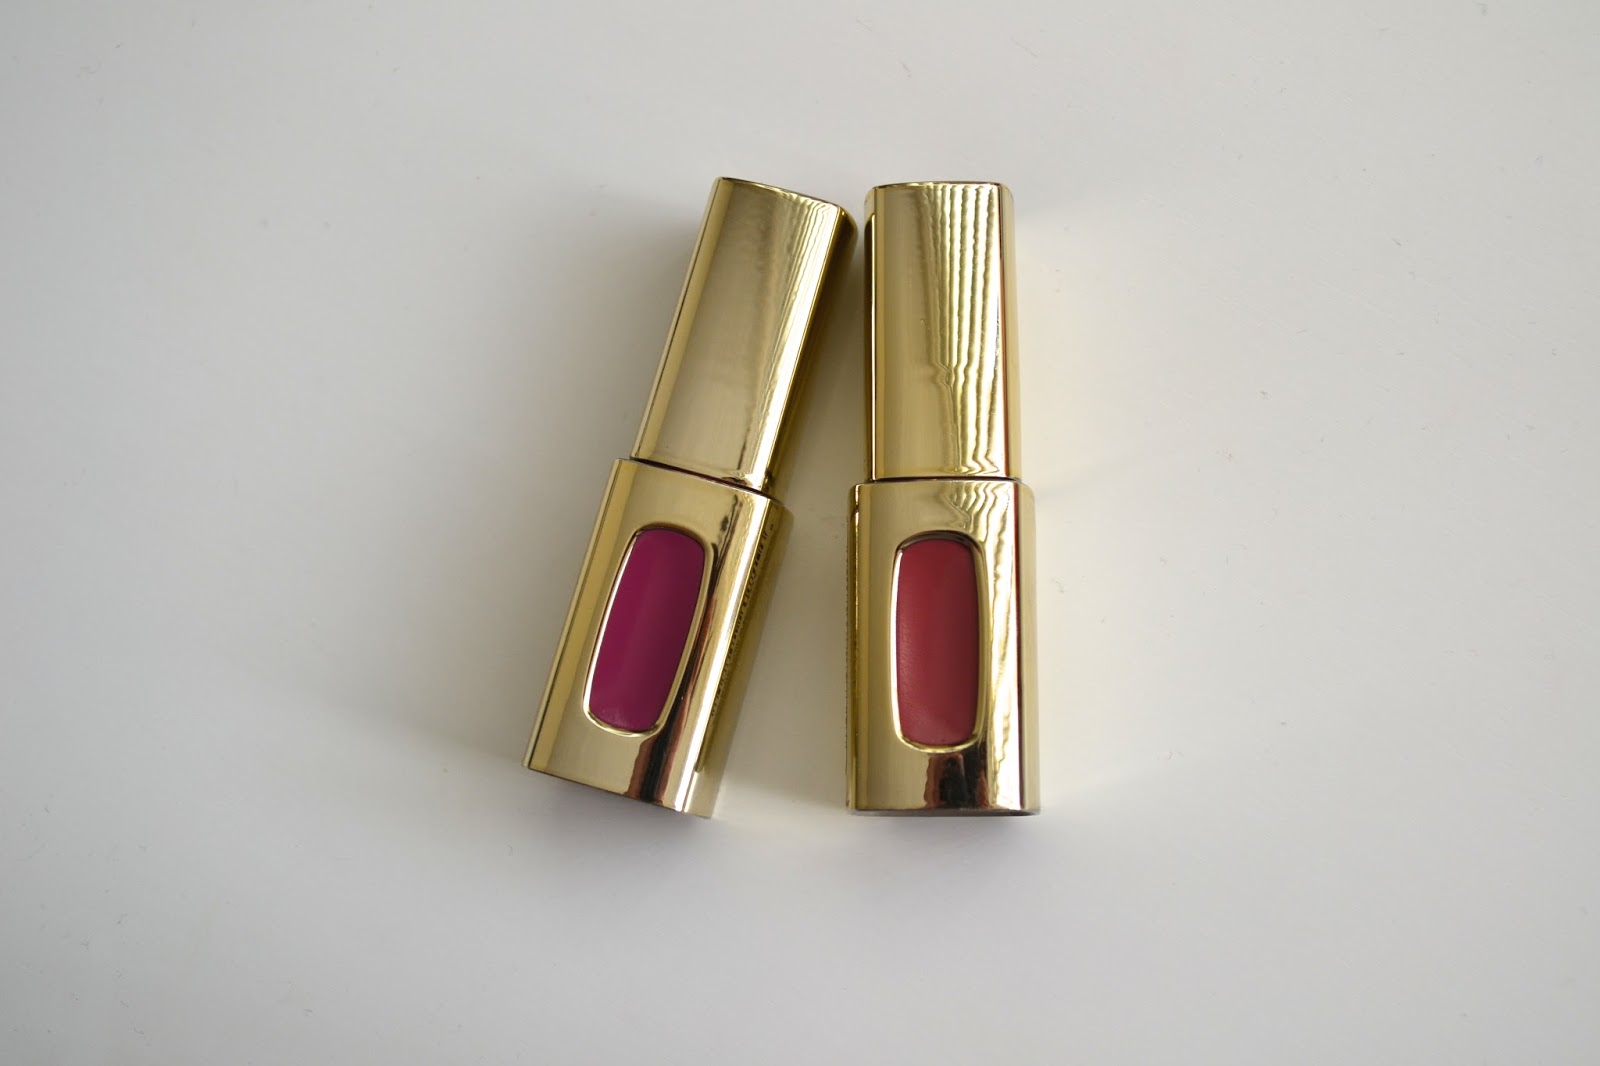 L’Oreal Extraordinaire by Colour Riche (2 Shades) - Photos and Swatches